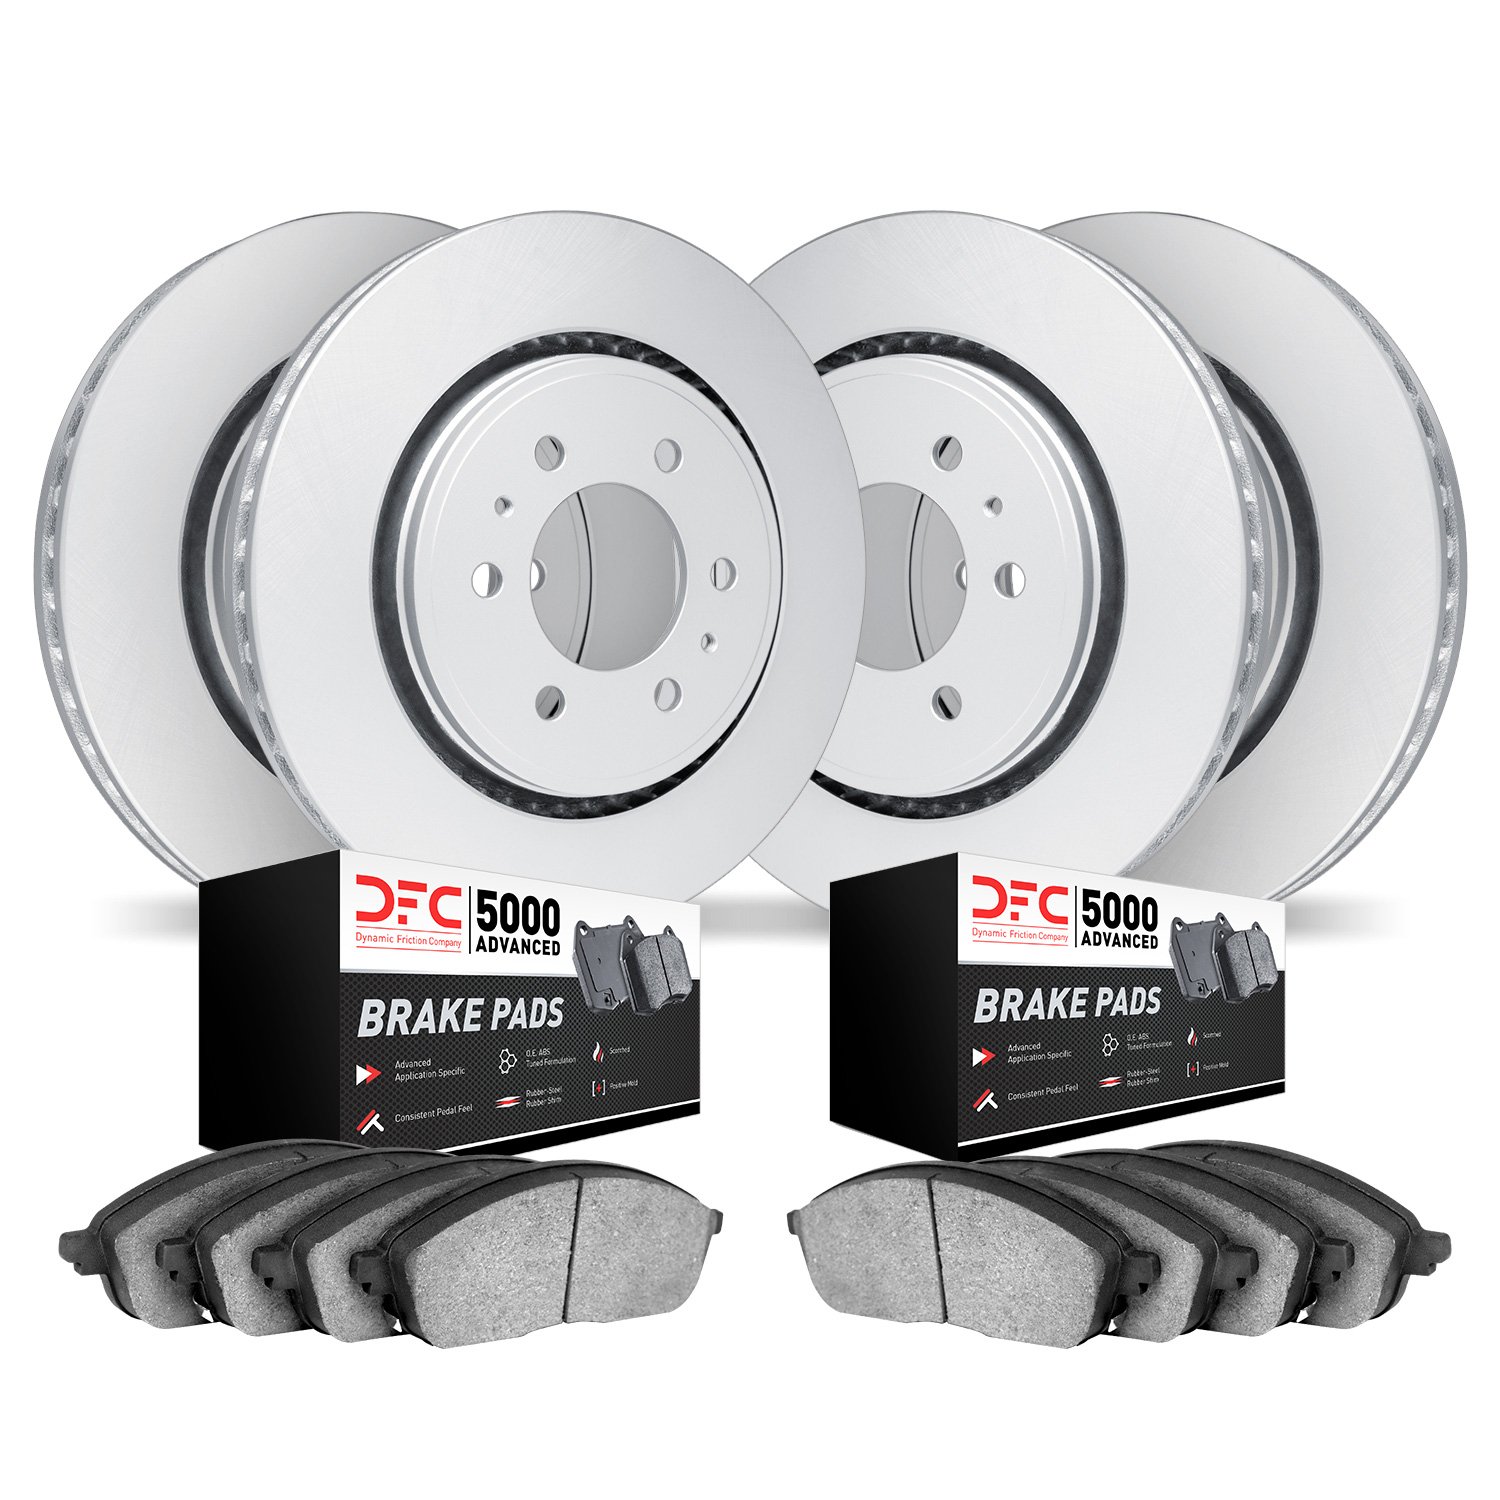 4504-48039 Geospec Brake Rotors w/5000 Advanced Brake Pads Kit, Fits Select GM, Position: Front and Rear